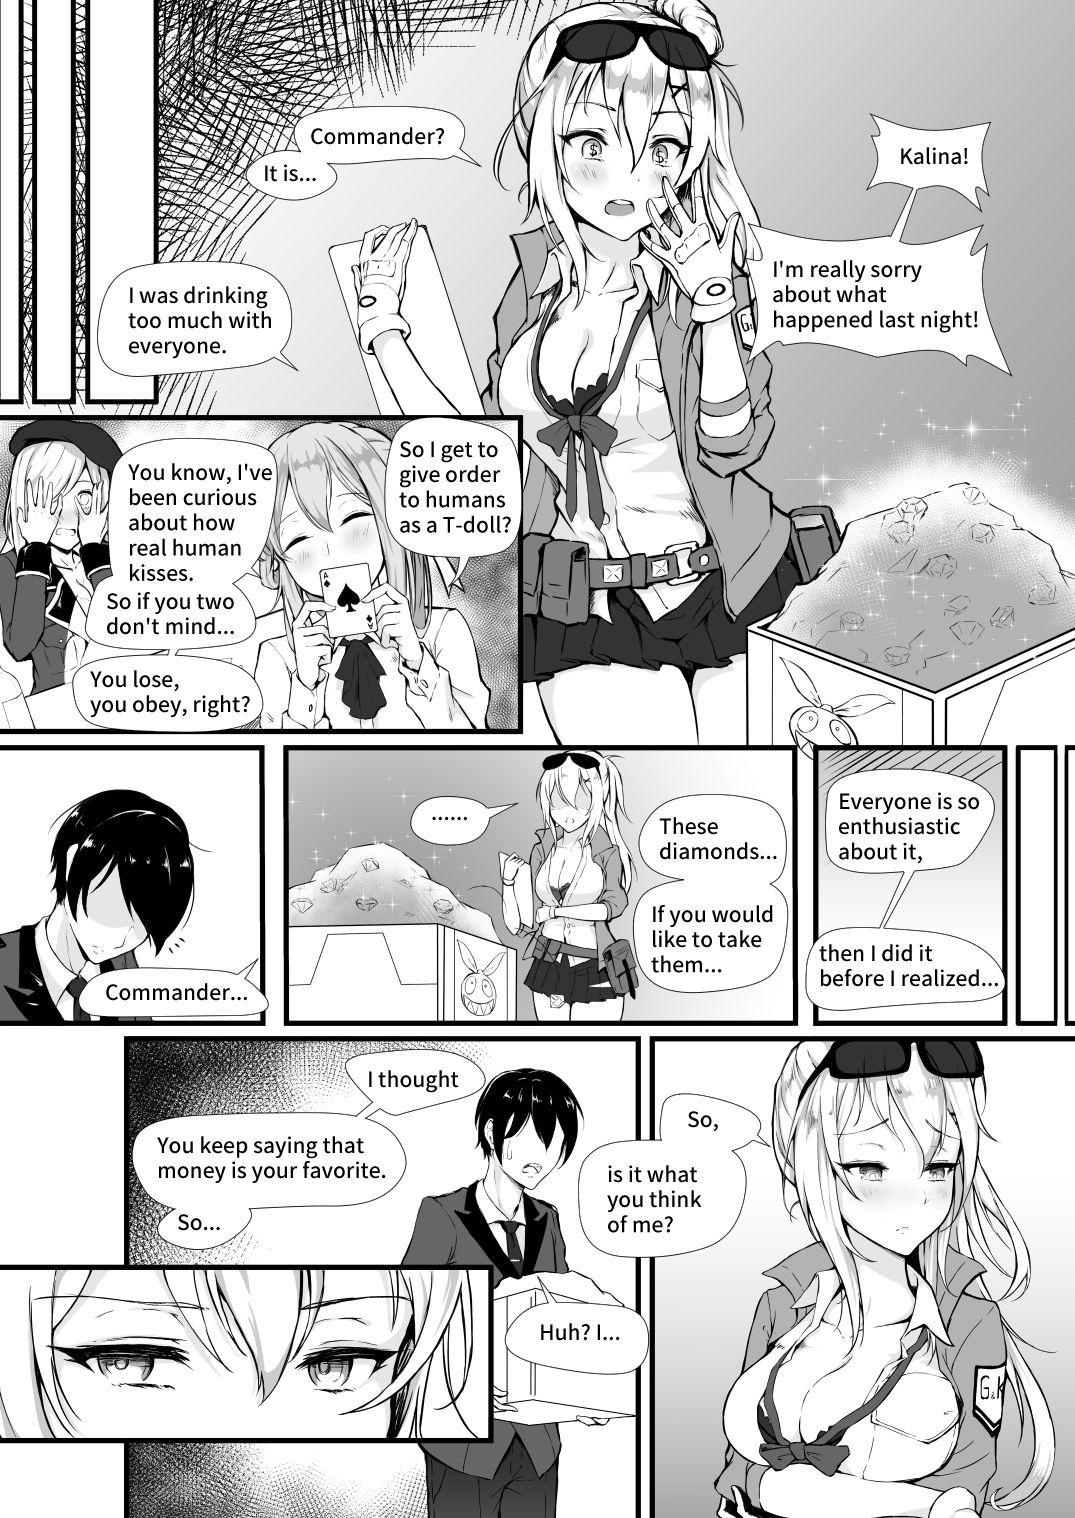 Tall How Many Diamonds a Kiss Worth? - Girls frontline Tugging - Page 5